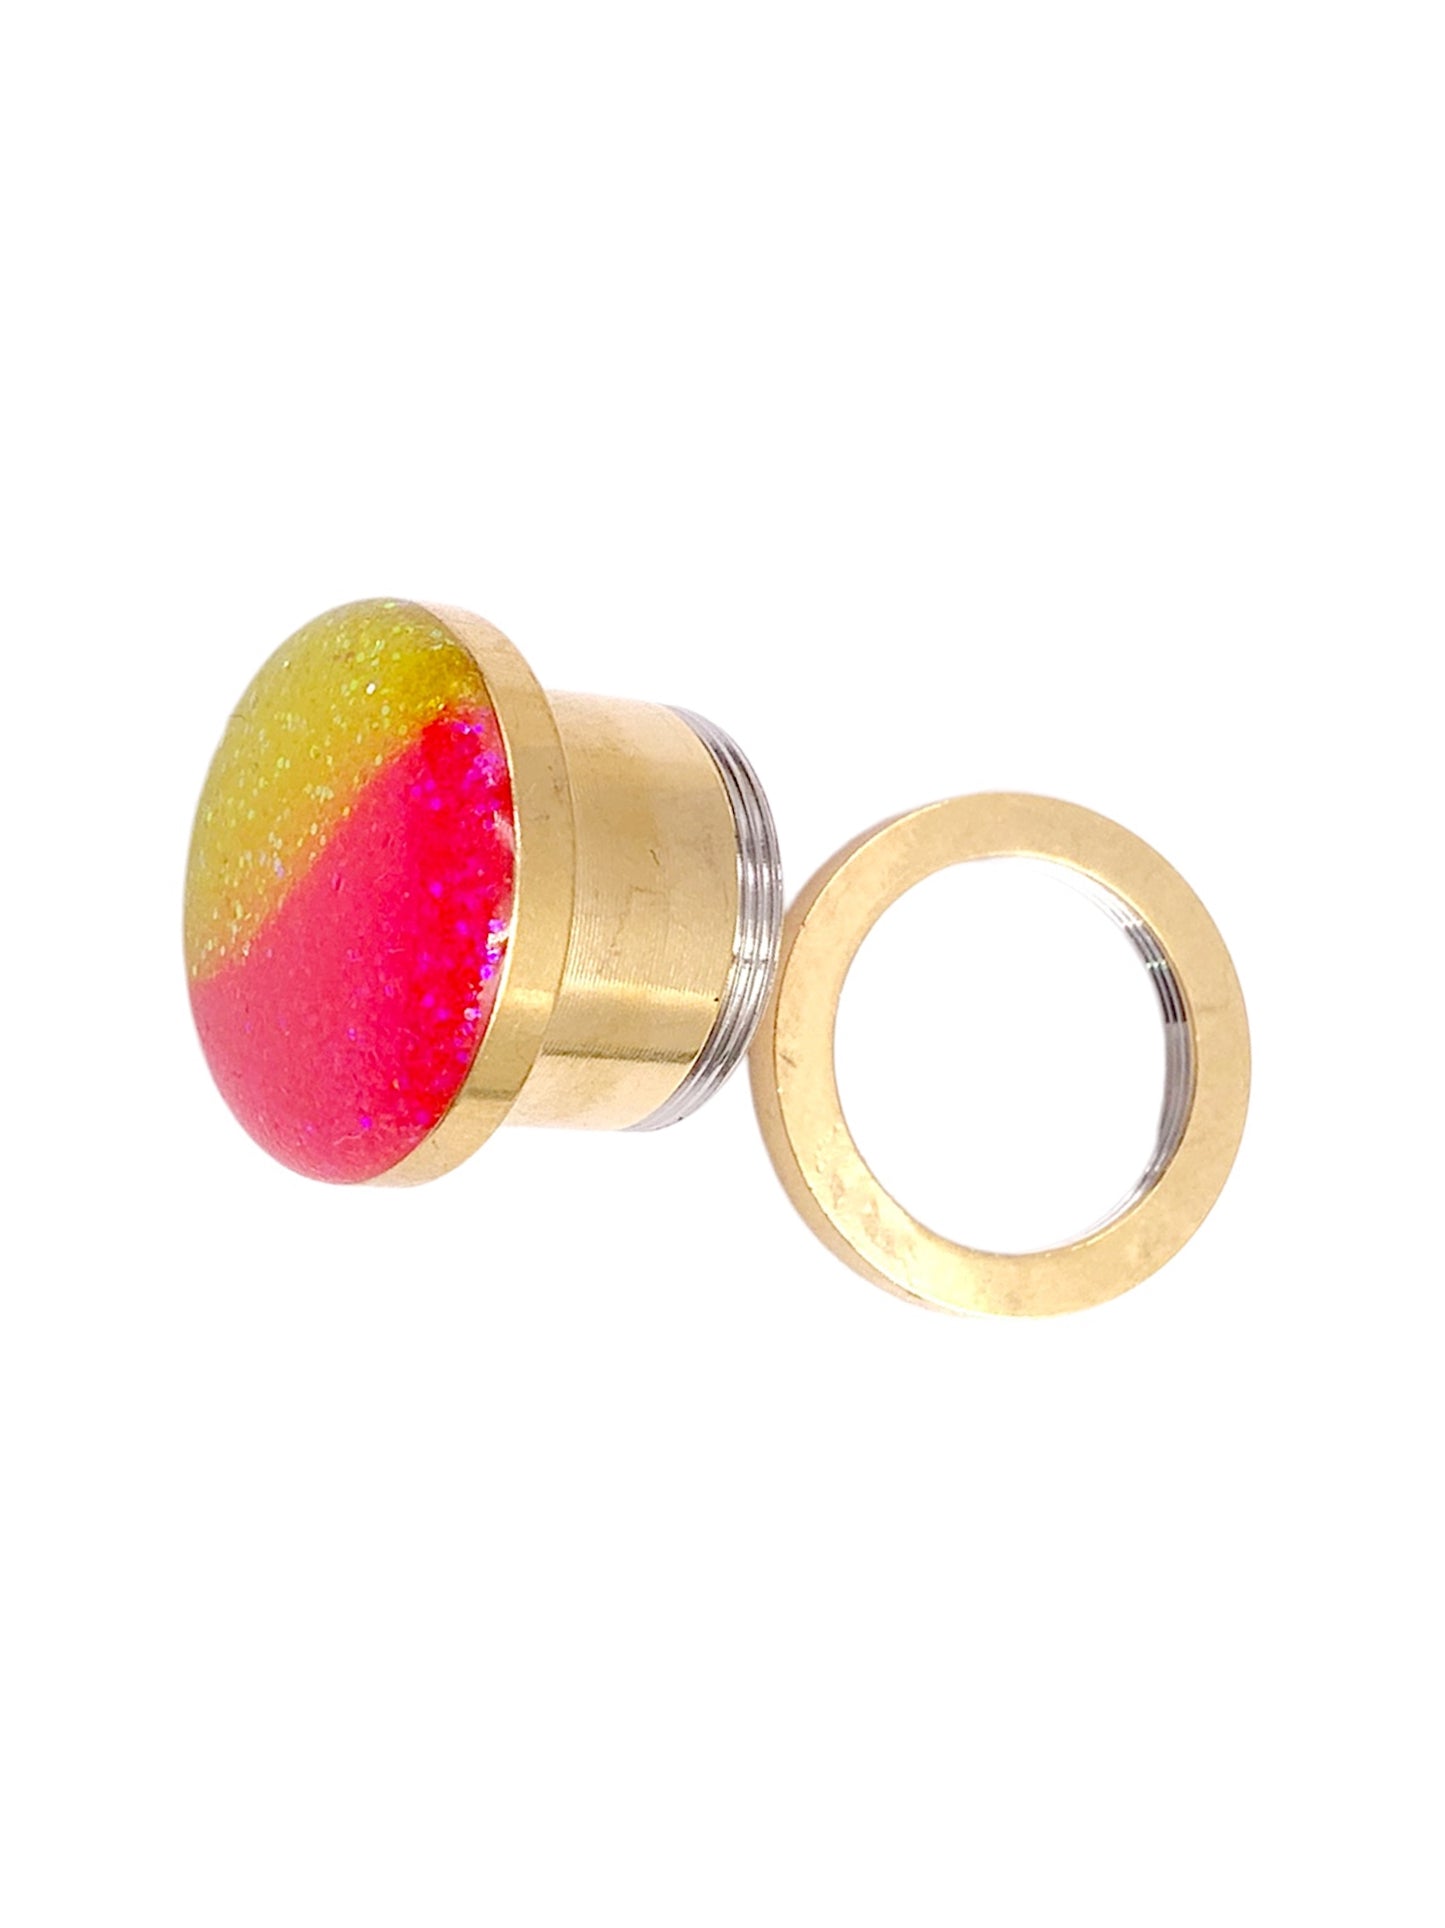 Retro Glow Pink and Yellow Sparkle Plugs